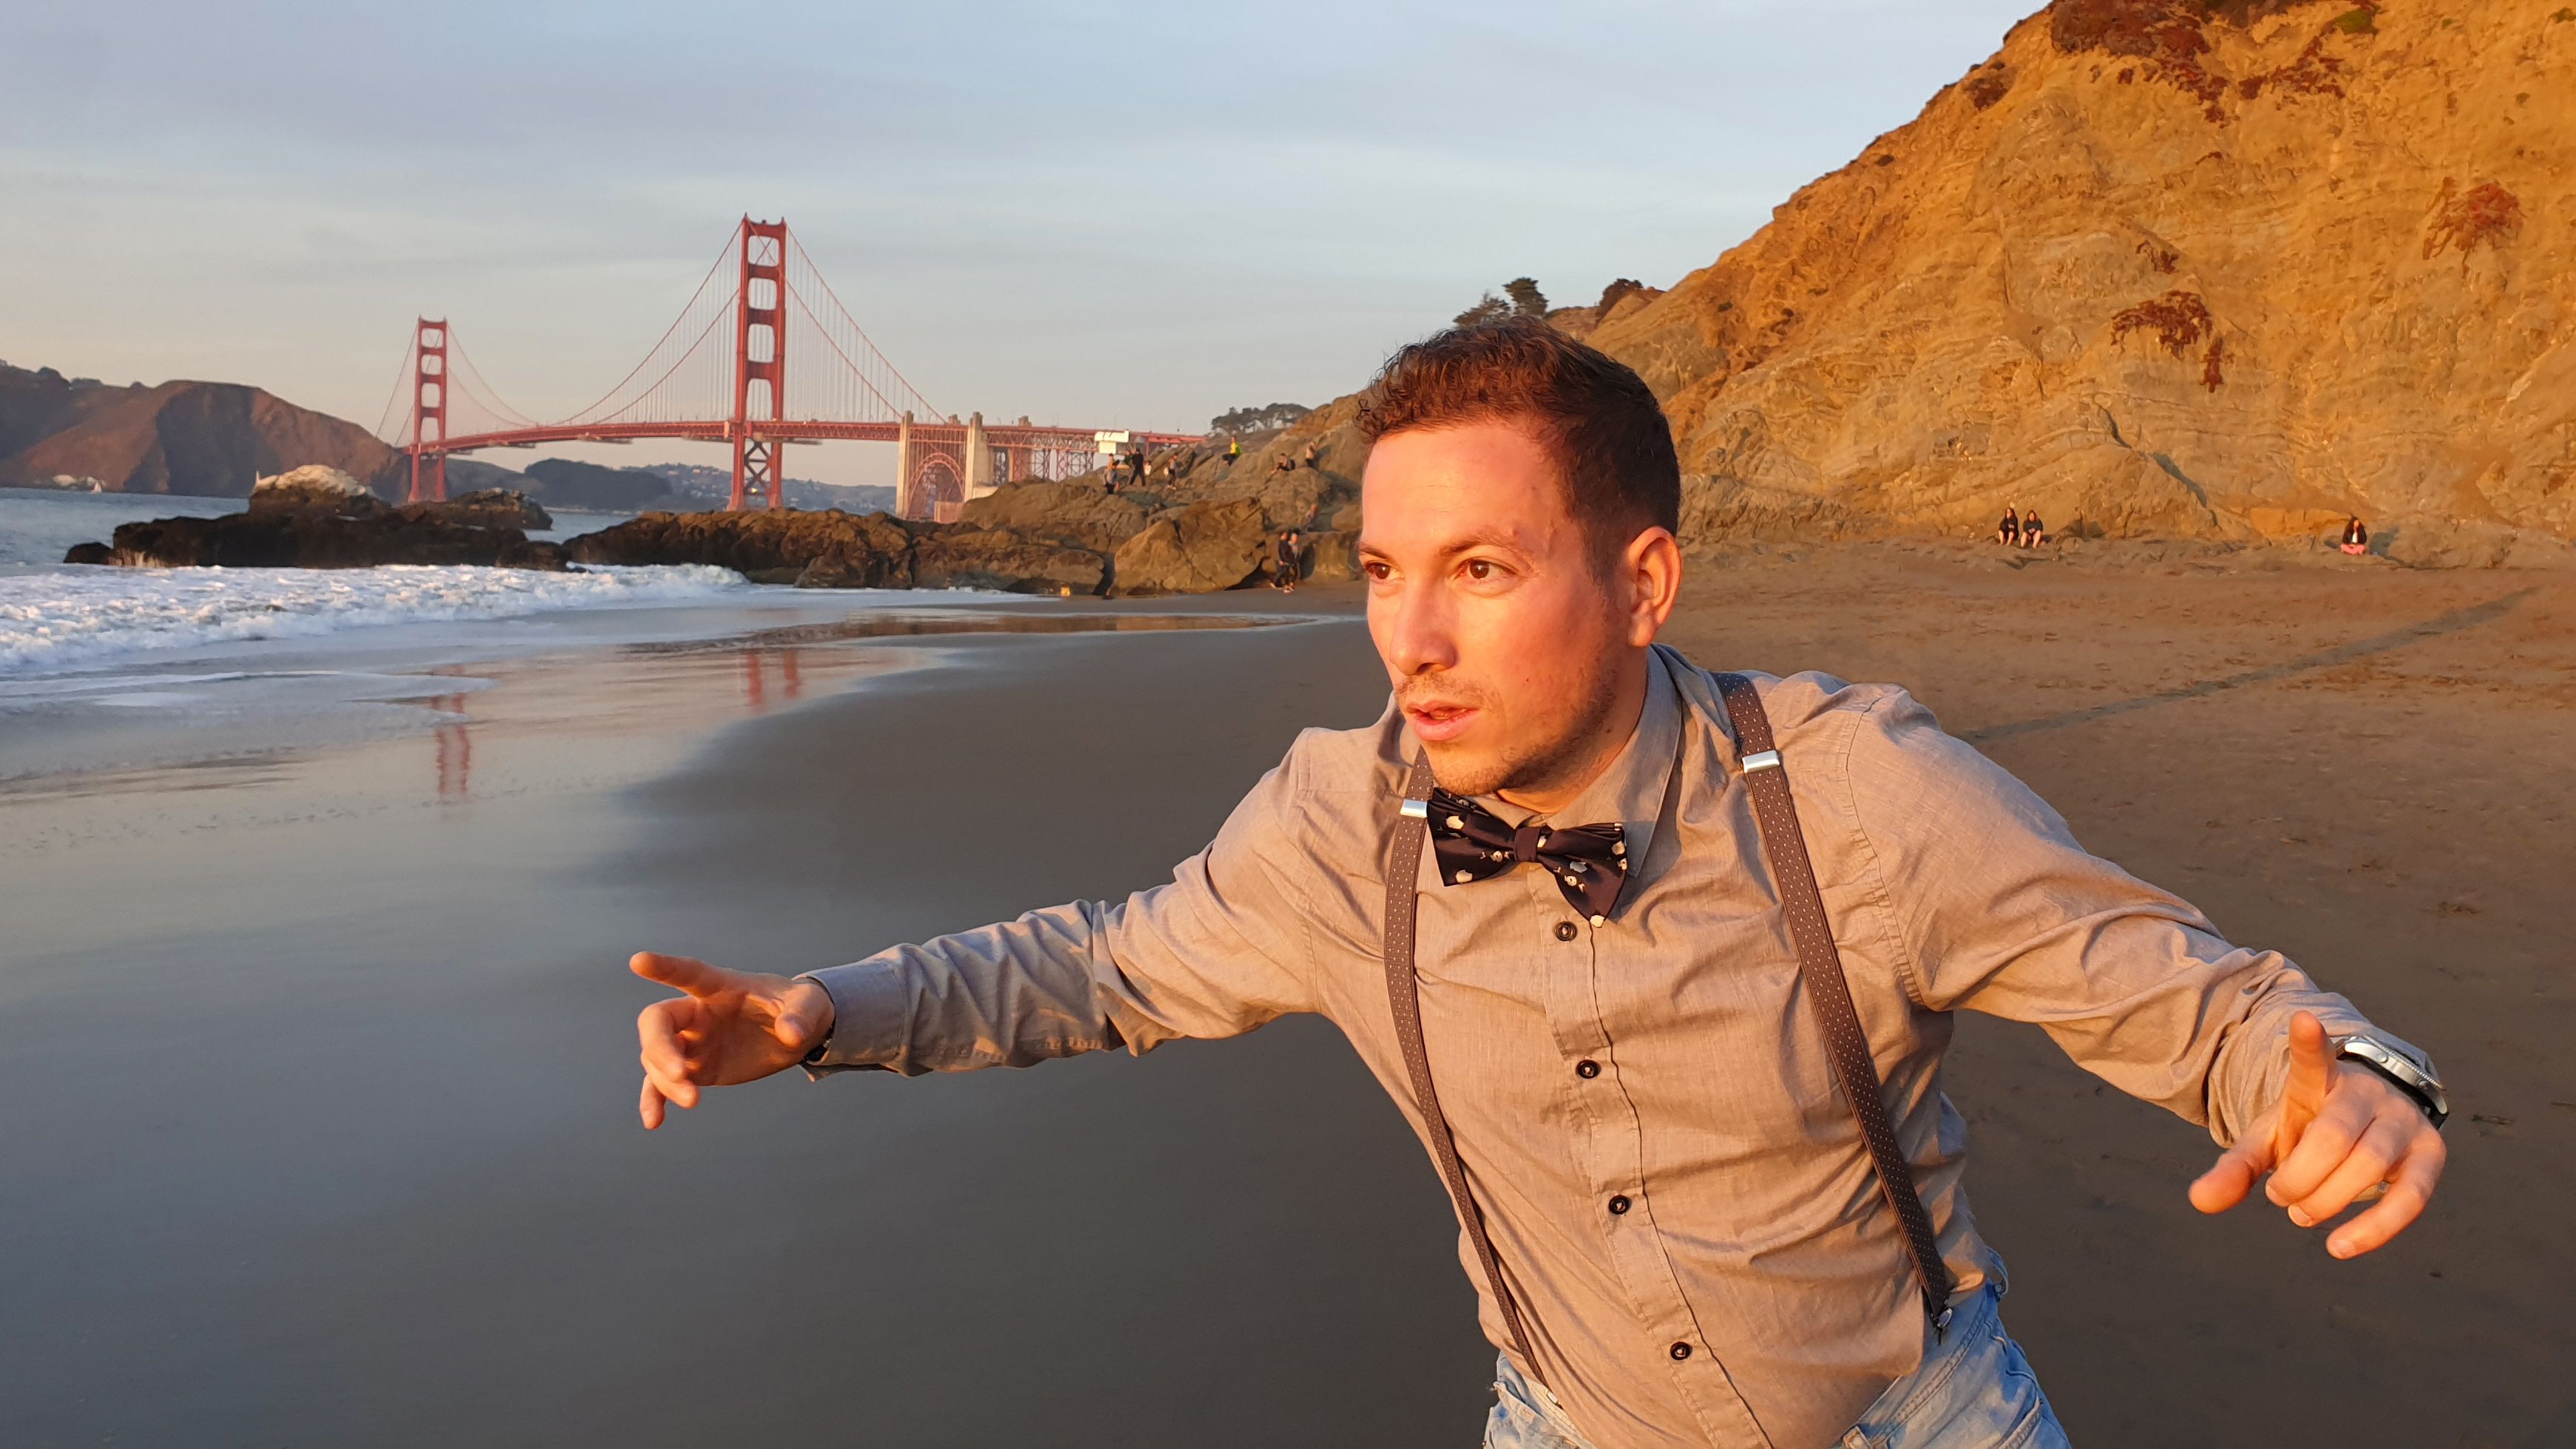 Christophe swiss local guide with sunset color and Golden Bridge in San Francisco